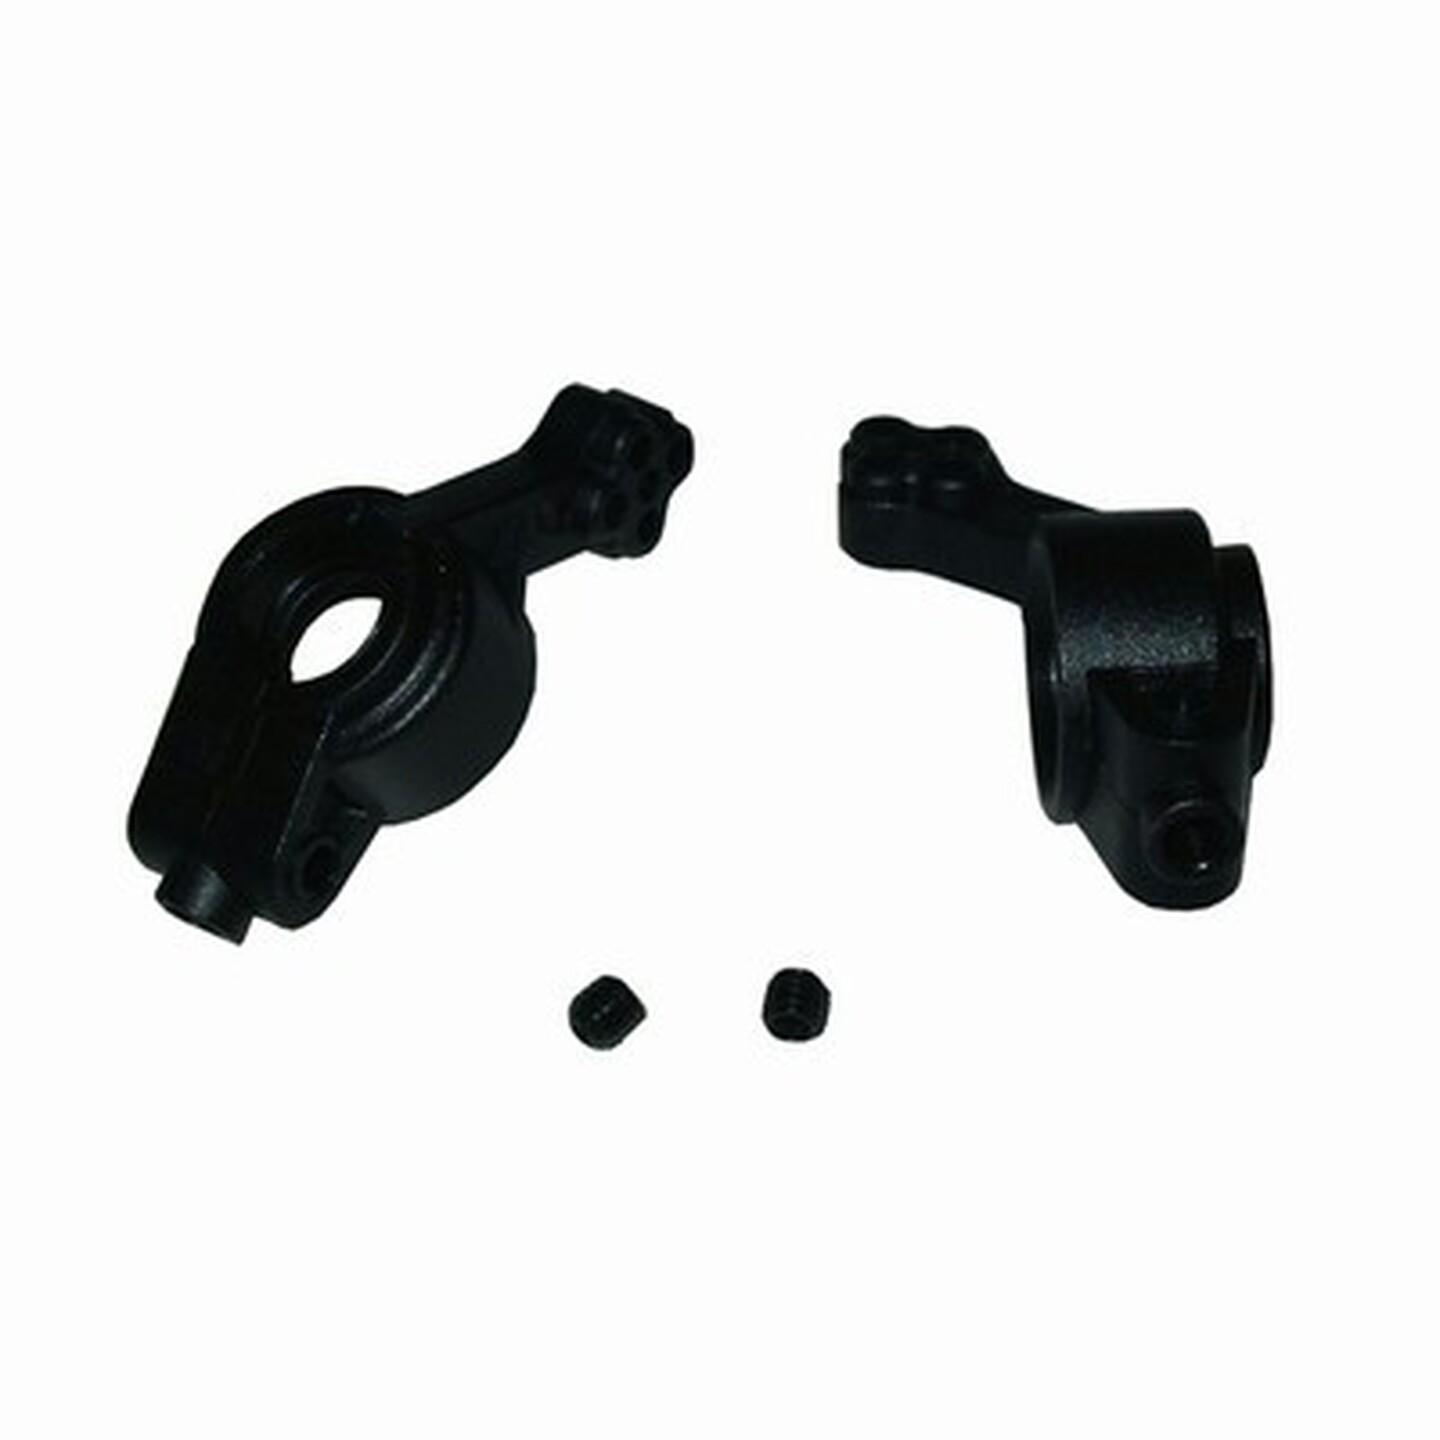 Spare Rear Steering Arm for GT-3610 & GT-3612